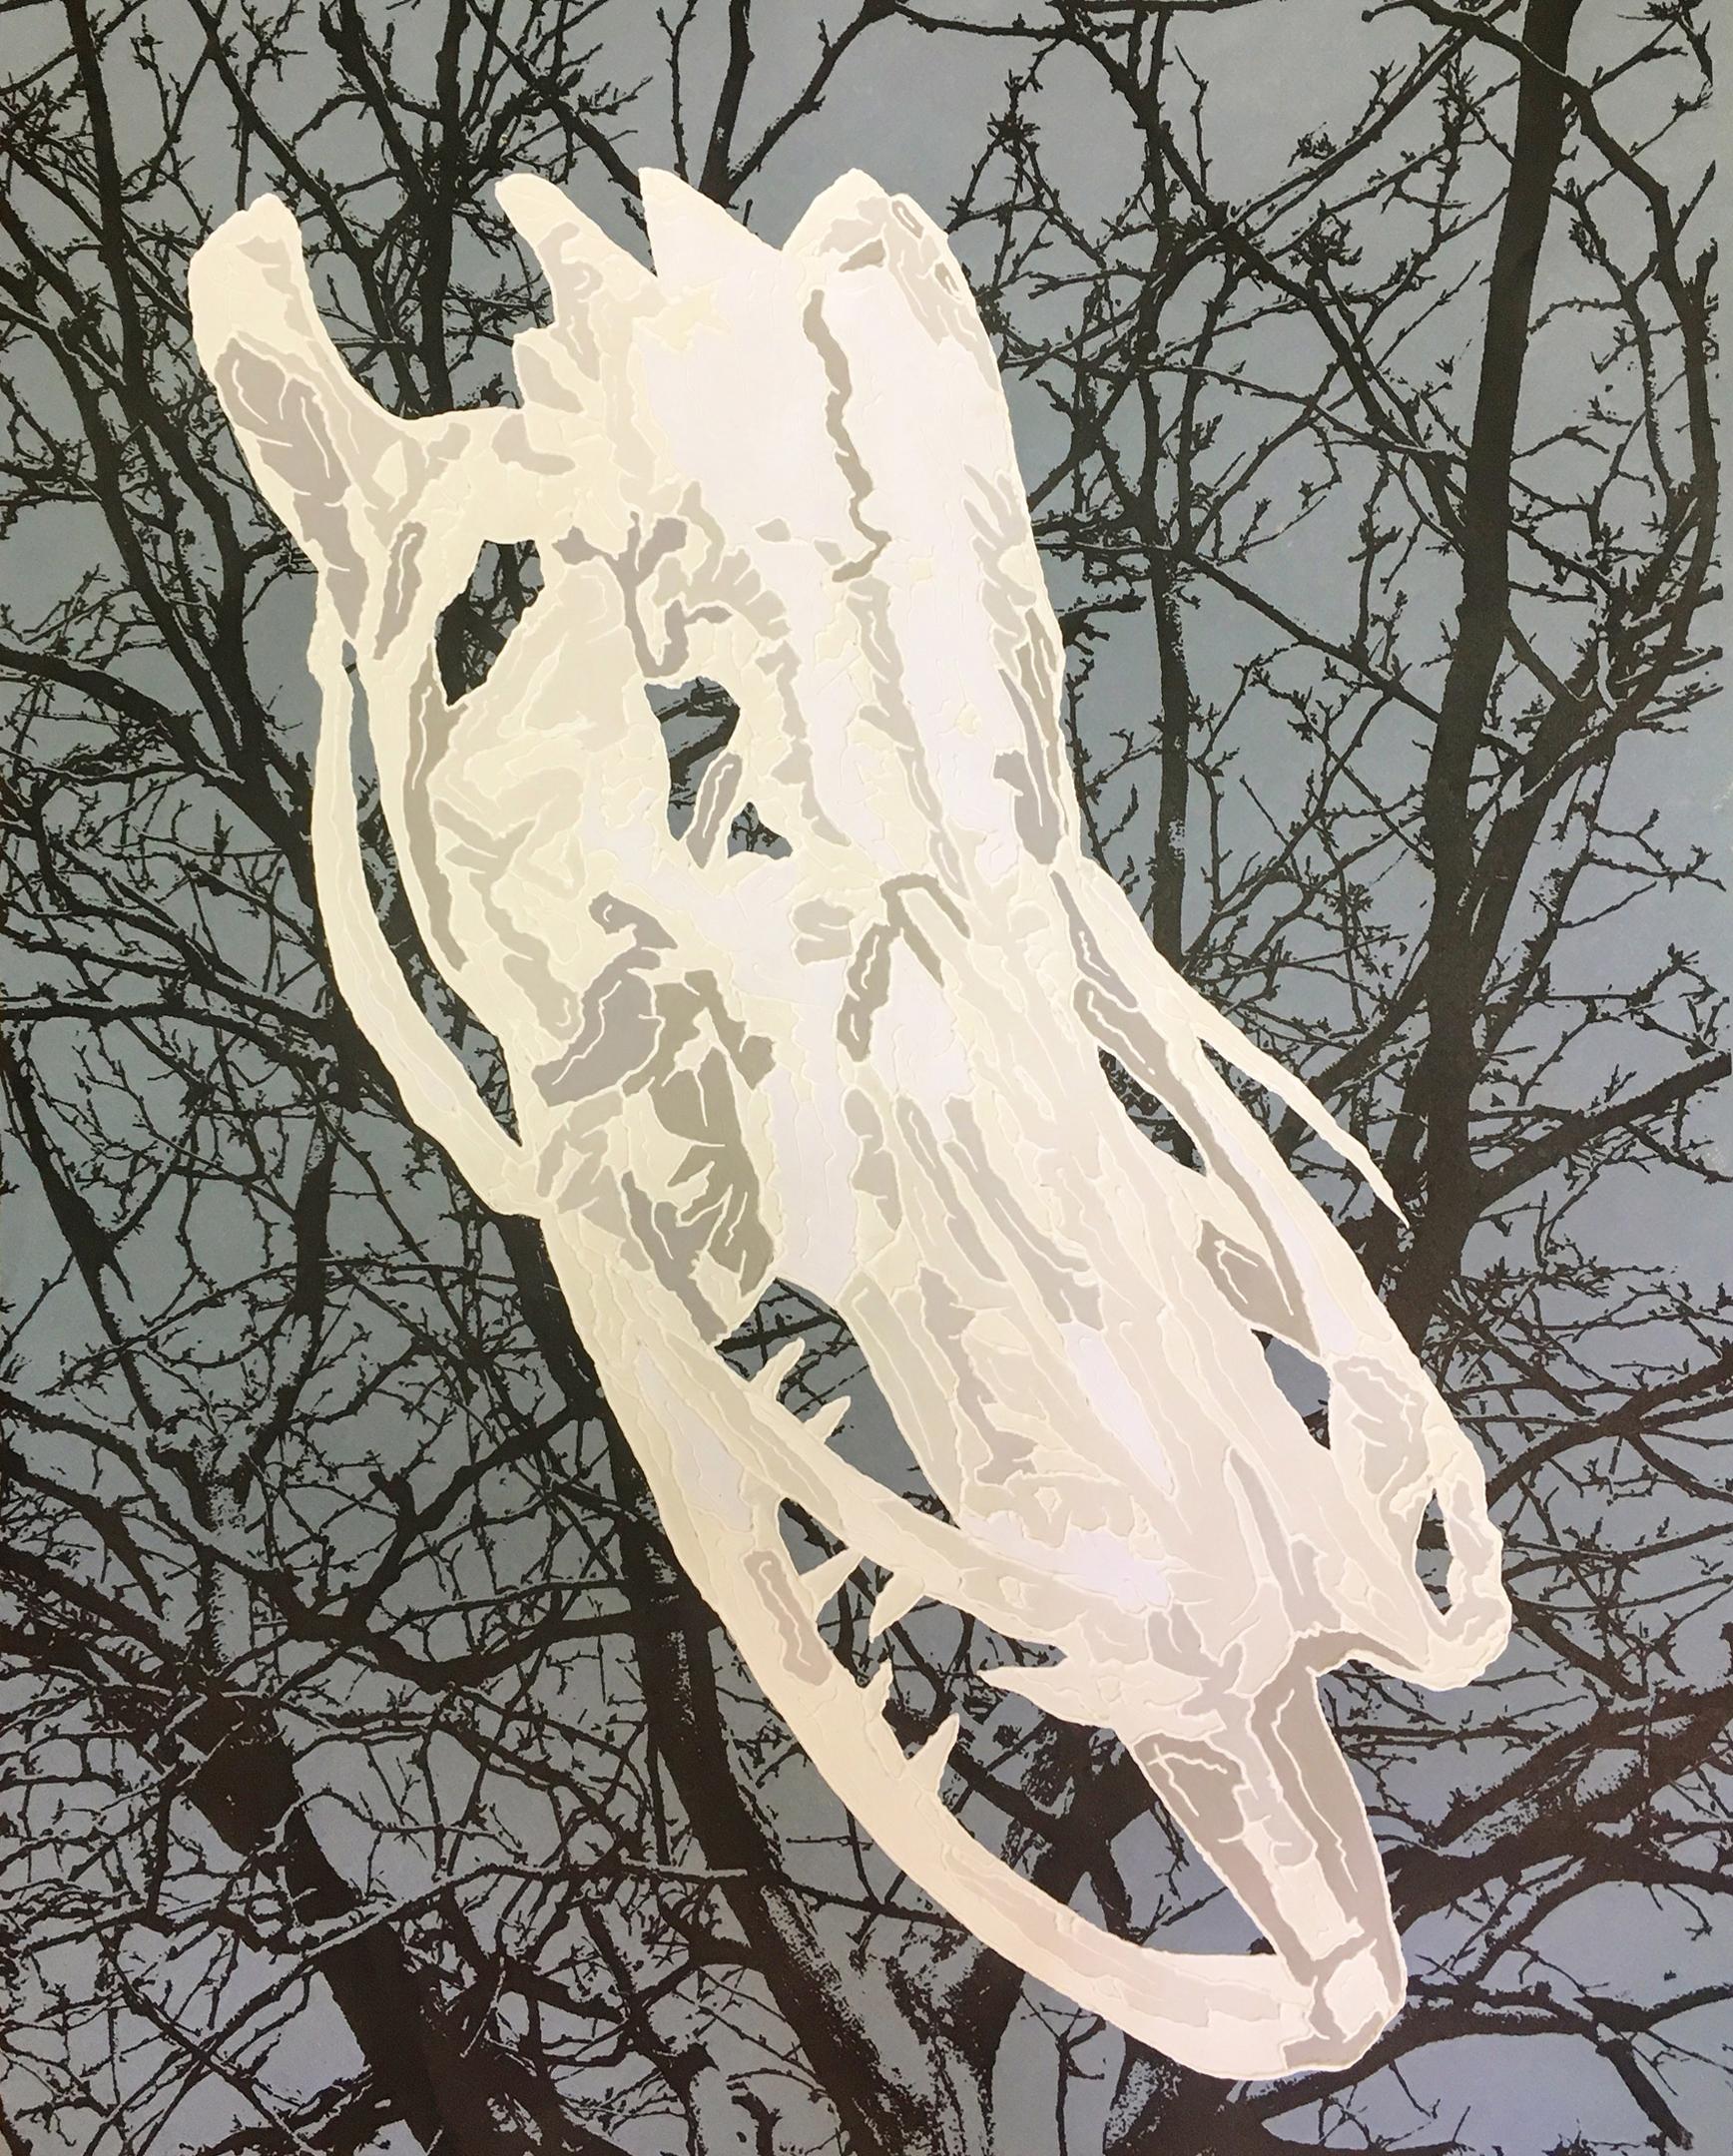 J Ivcevich, Trail Natural History (Blue Grey Gator), mixed media on paper, 2018 - Mixed Media Art by J. Ivcevich